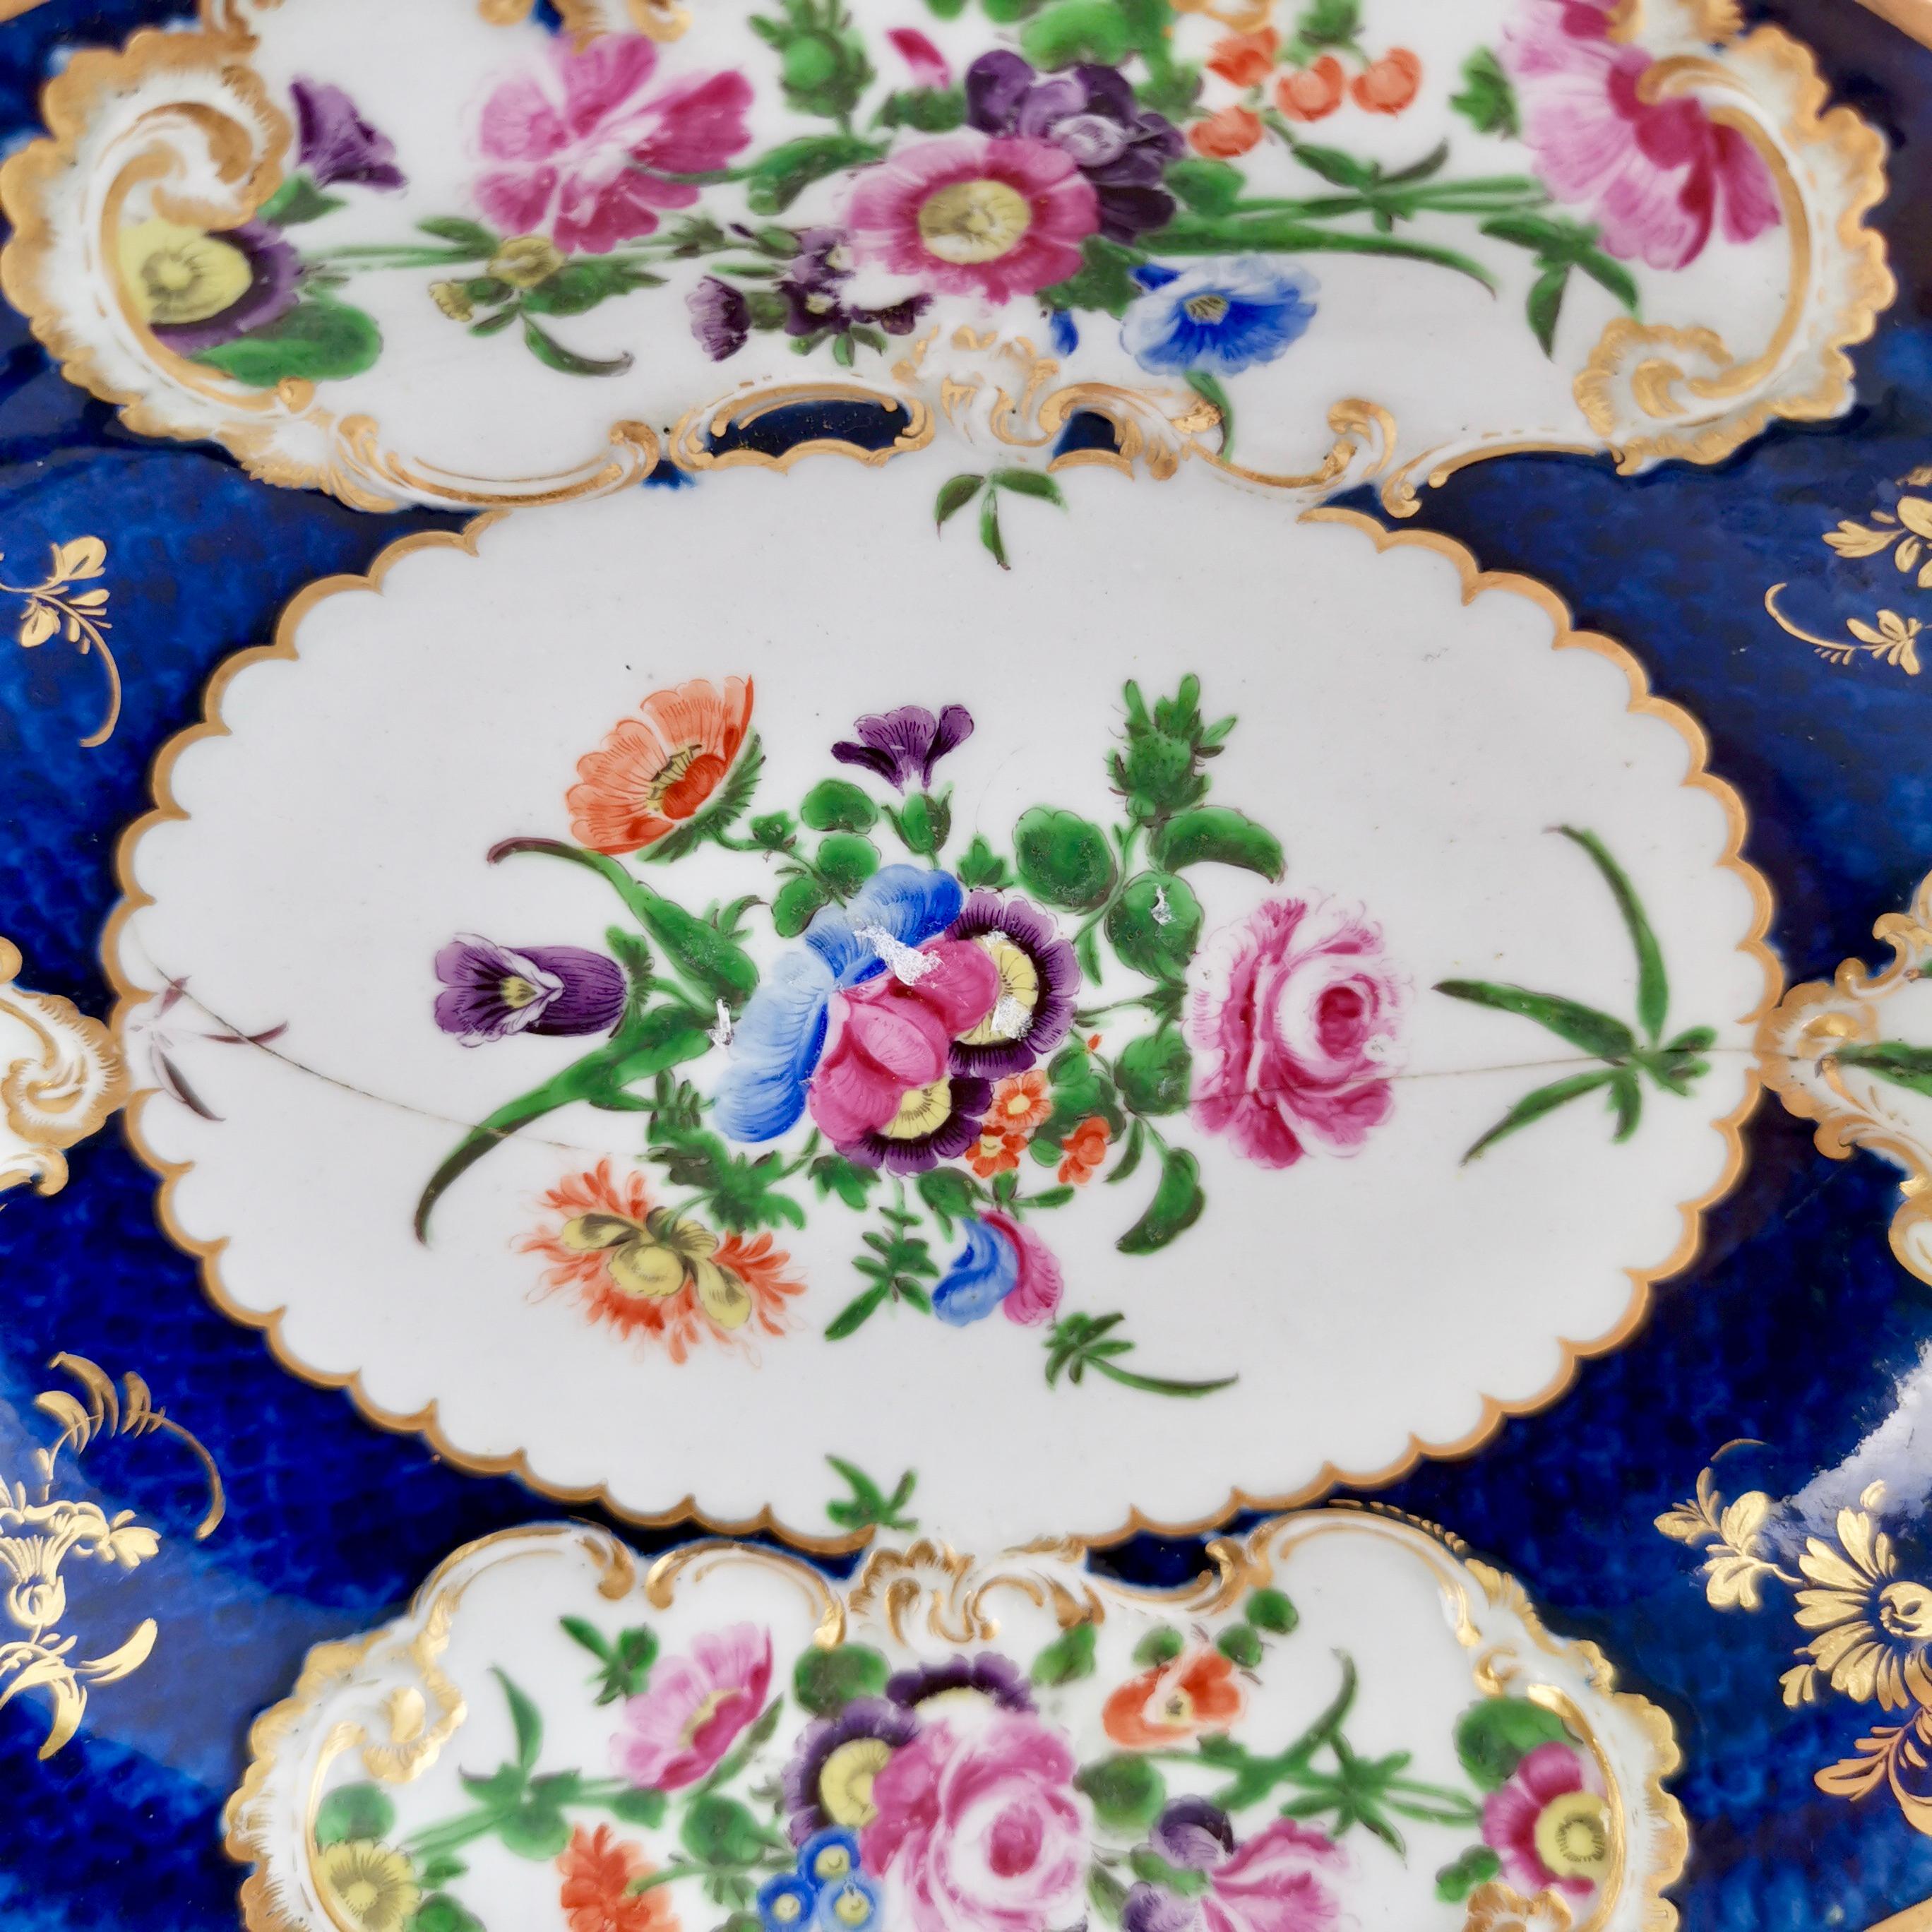 George III Worcester Oval Dish, Blue Scale with Flower Reserves, 19th Century, 1765-1770